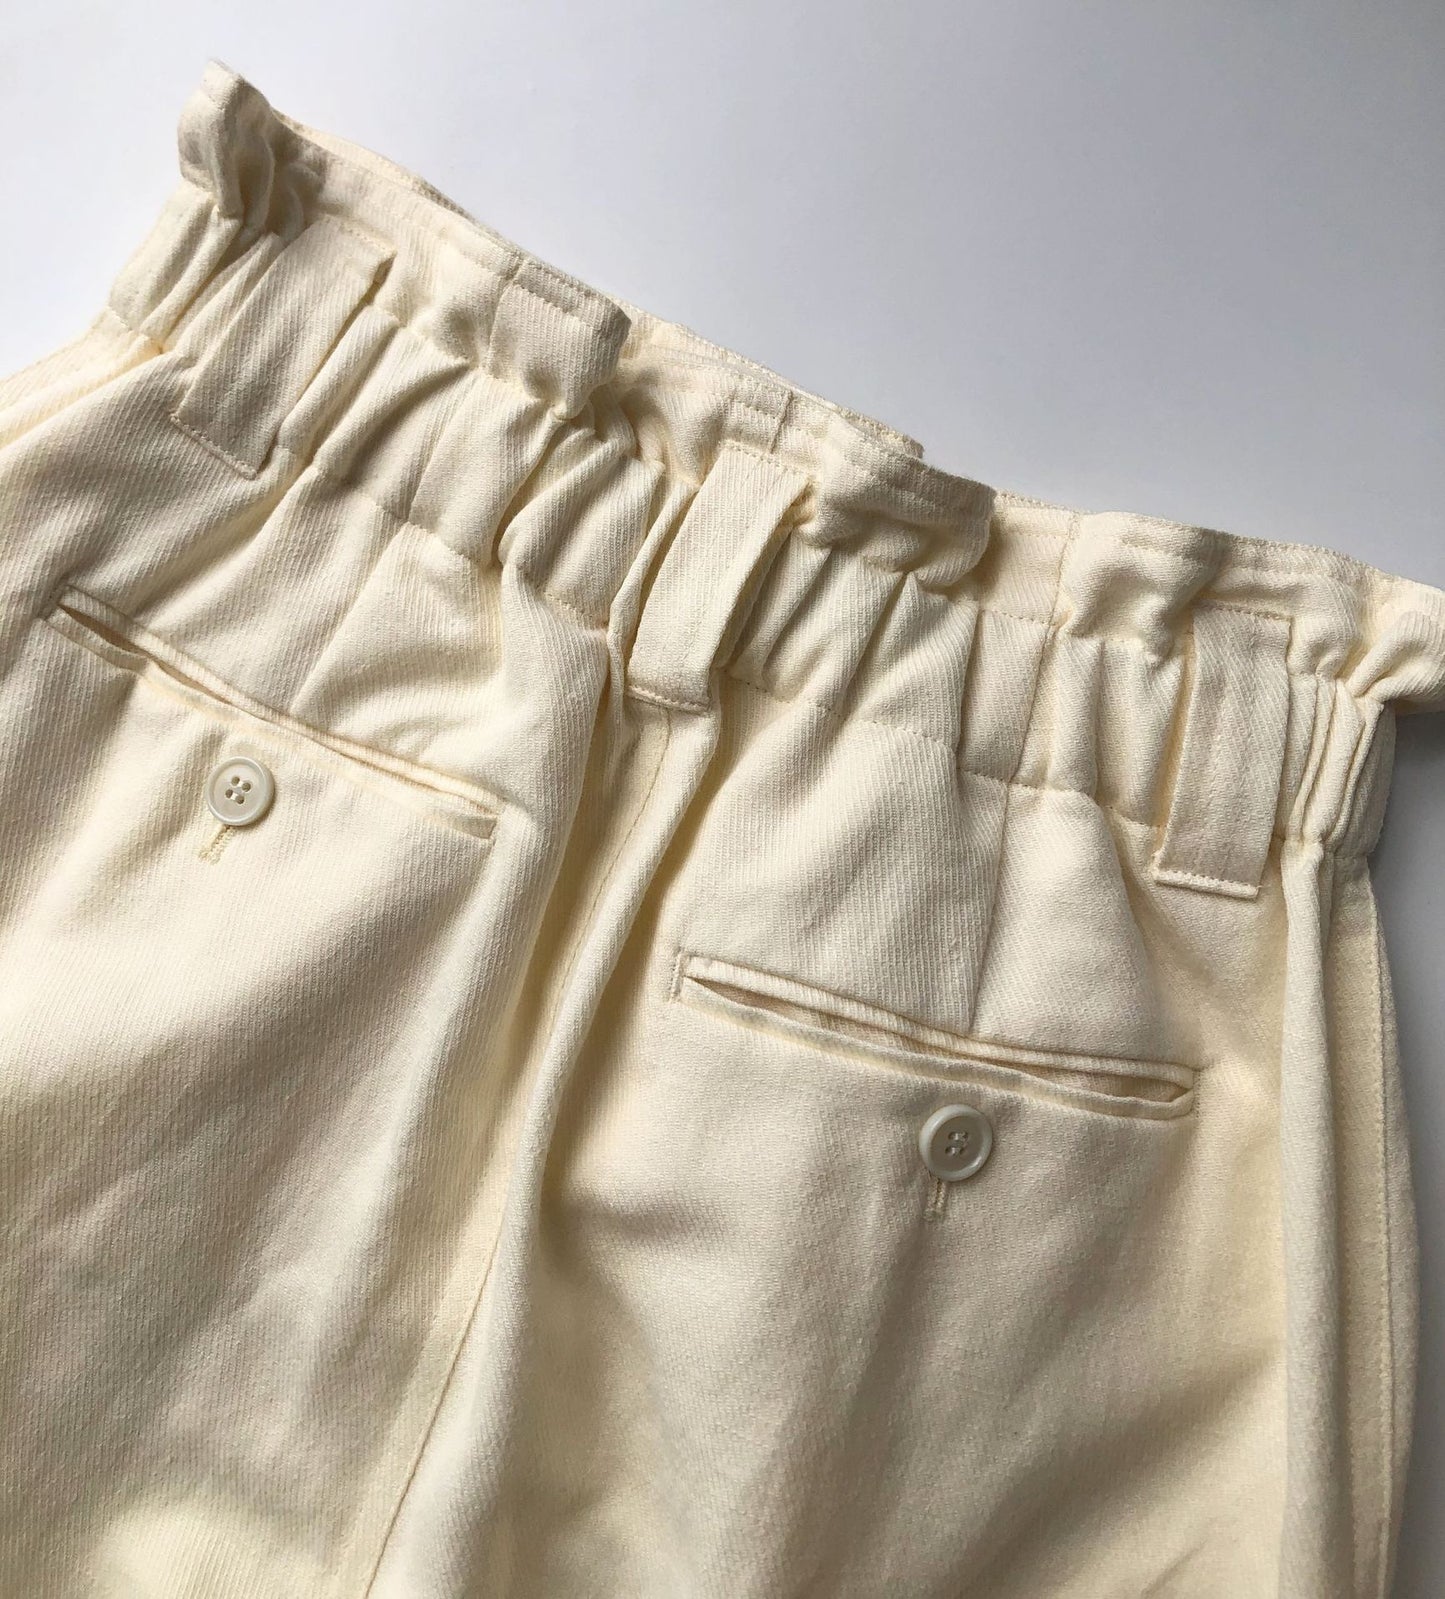 Natural Wrinkled Texture Flower Bud Trousers with Literary and Casual Style in Sand-Washed Cotton and Linen Material